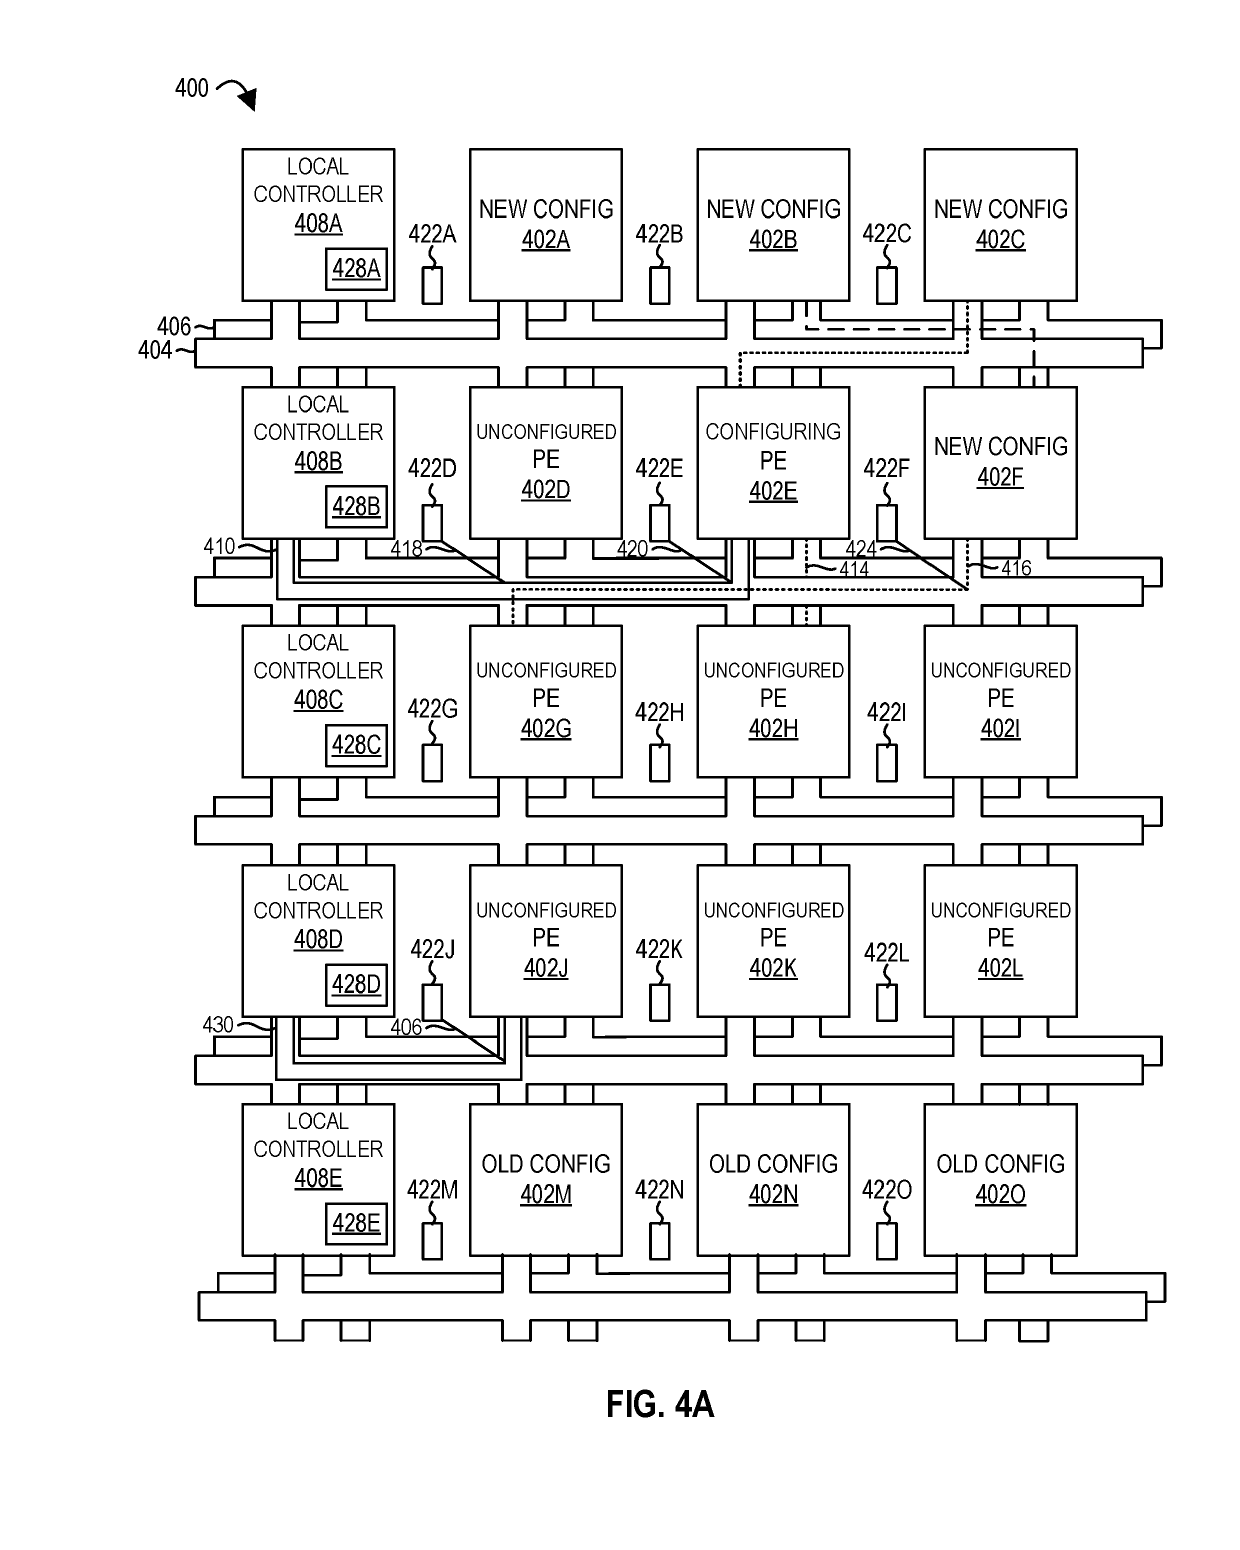 Processors and methods for pipelined runtime services in a spatial array